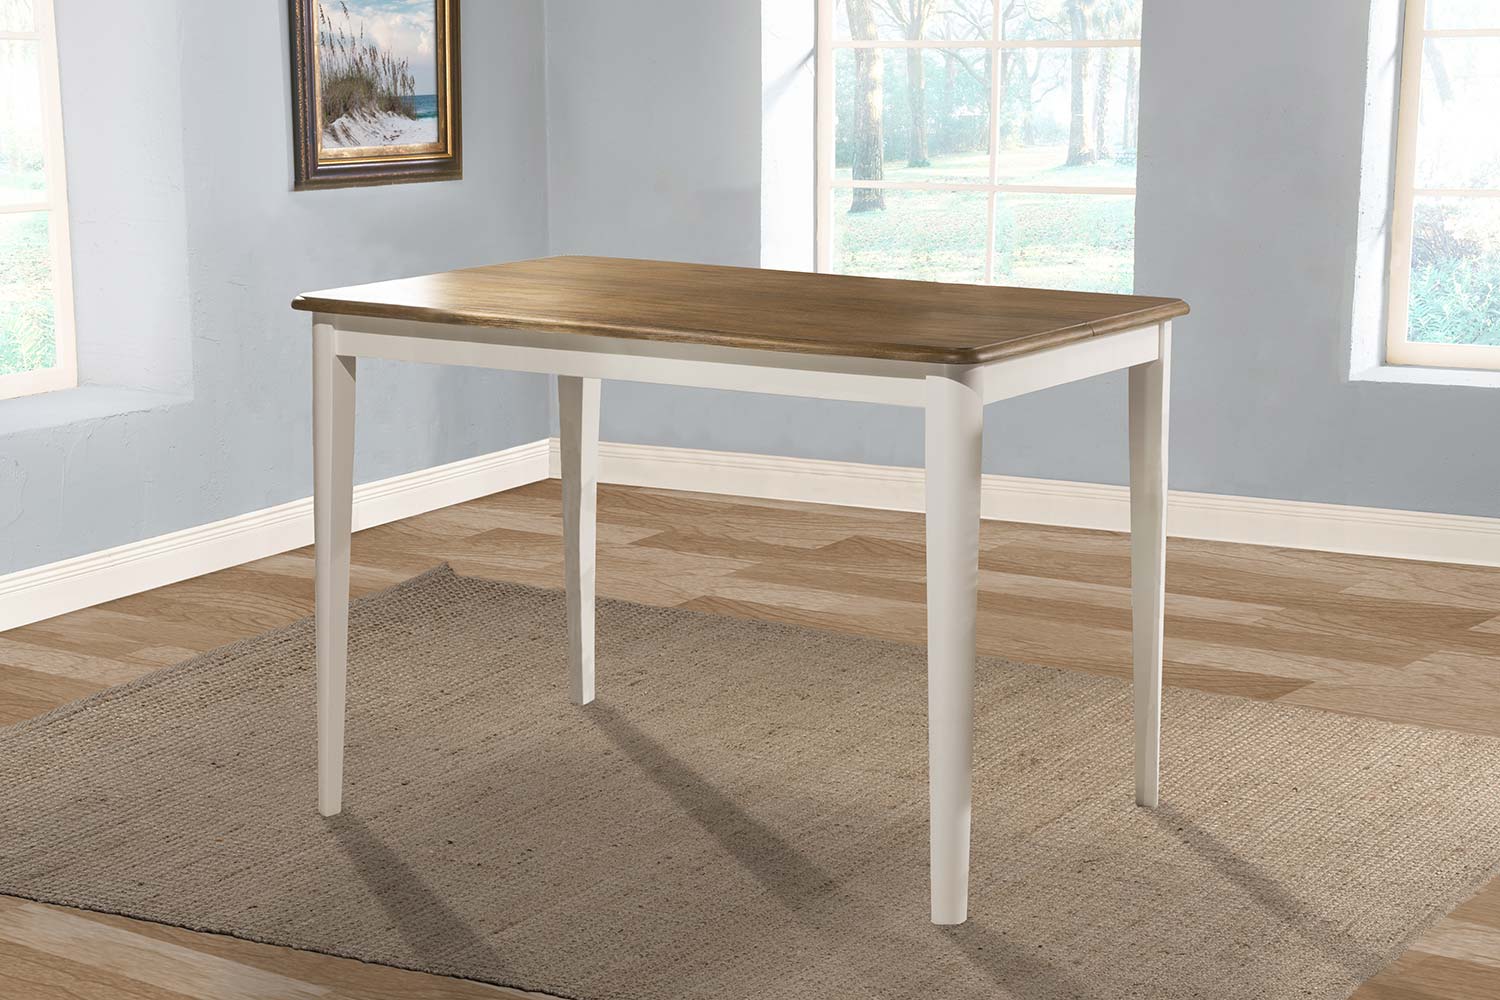 Hillsdale Bayberry Counter Height Extension Dining Table White Driftwood 5791 835 Hillsdalefurnituremart Com